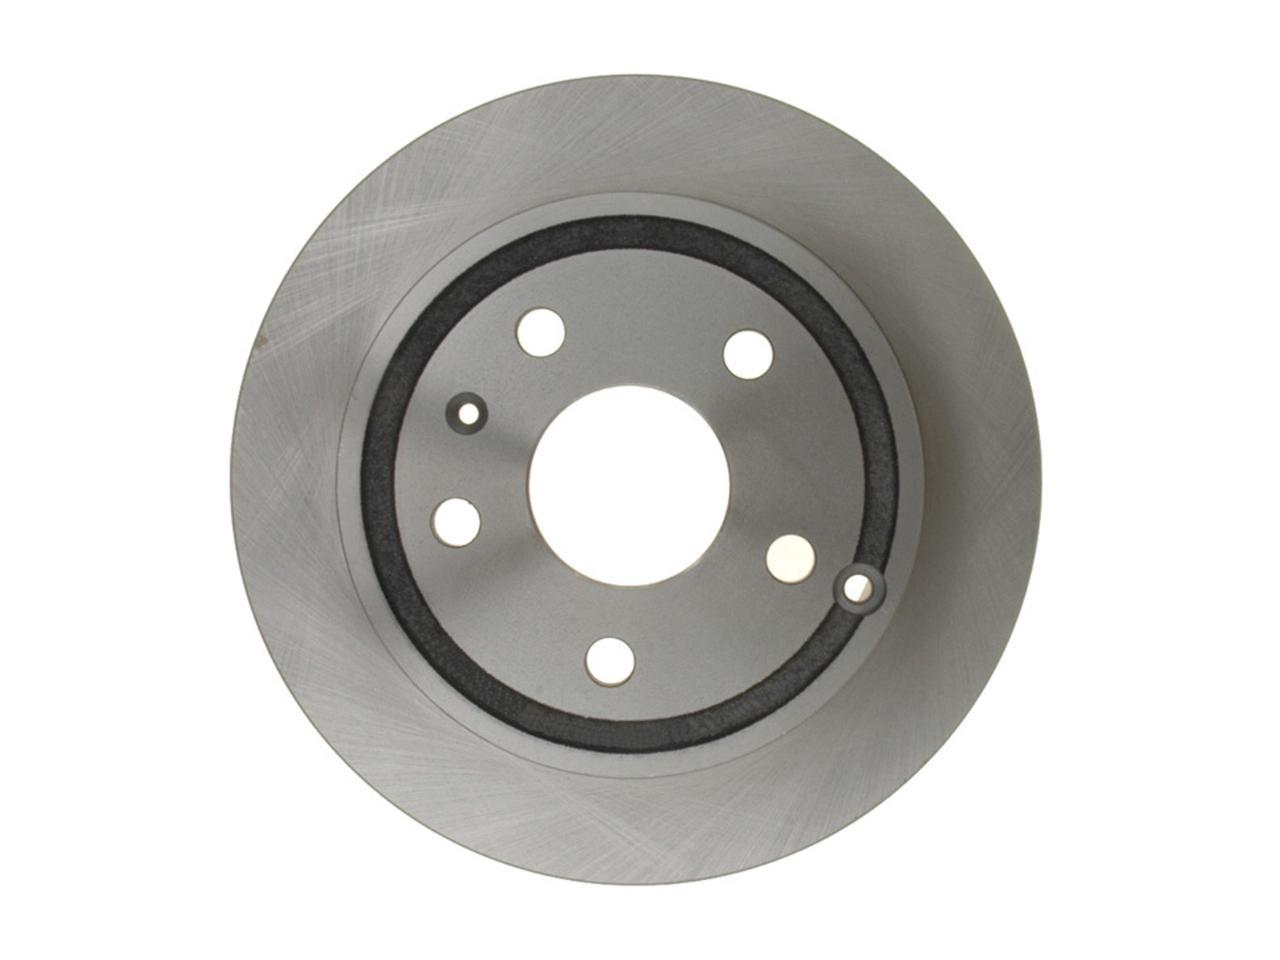 Details about   For 1974-1990 Jeep Wagoneer Brake Rotor Front Raybestos 61646XJ 1975 1976 1977